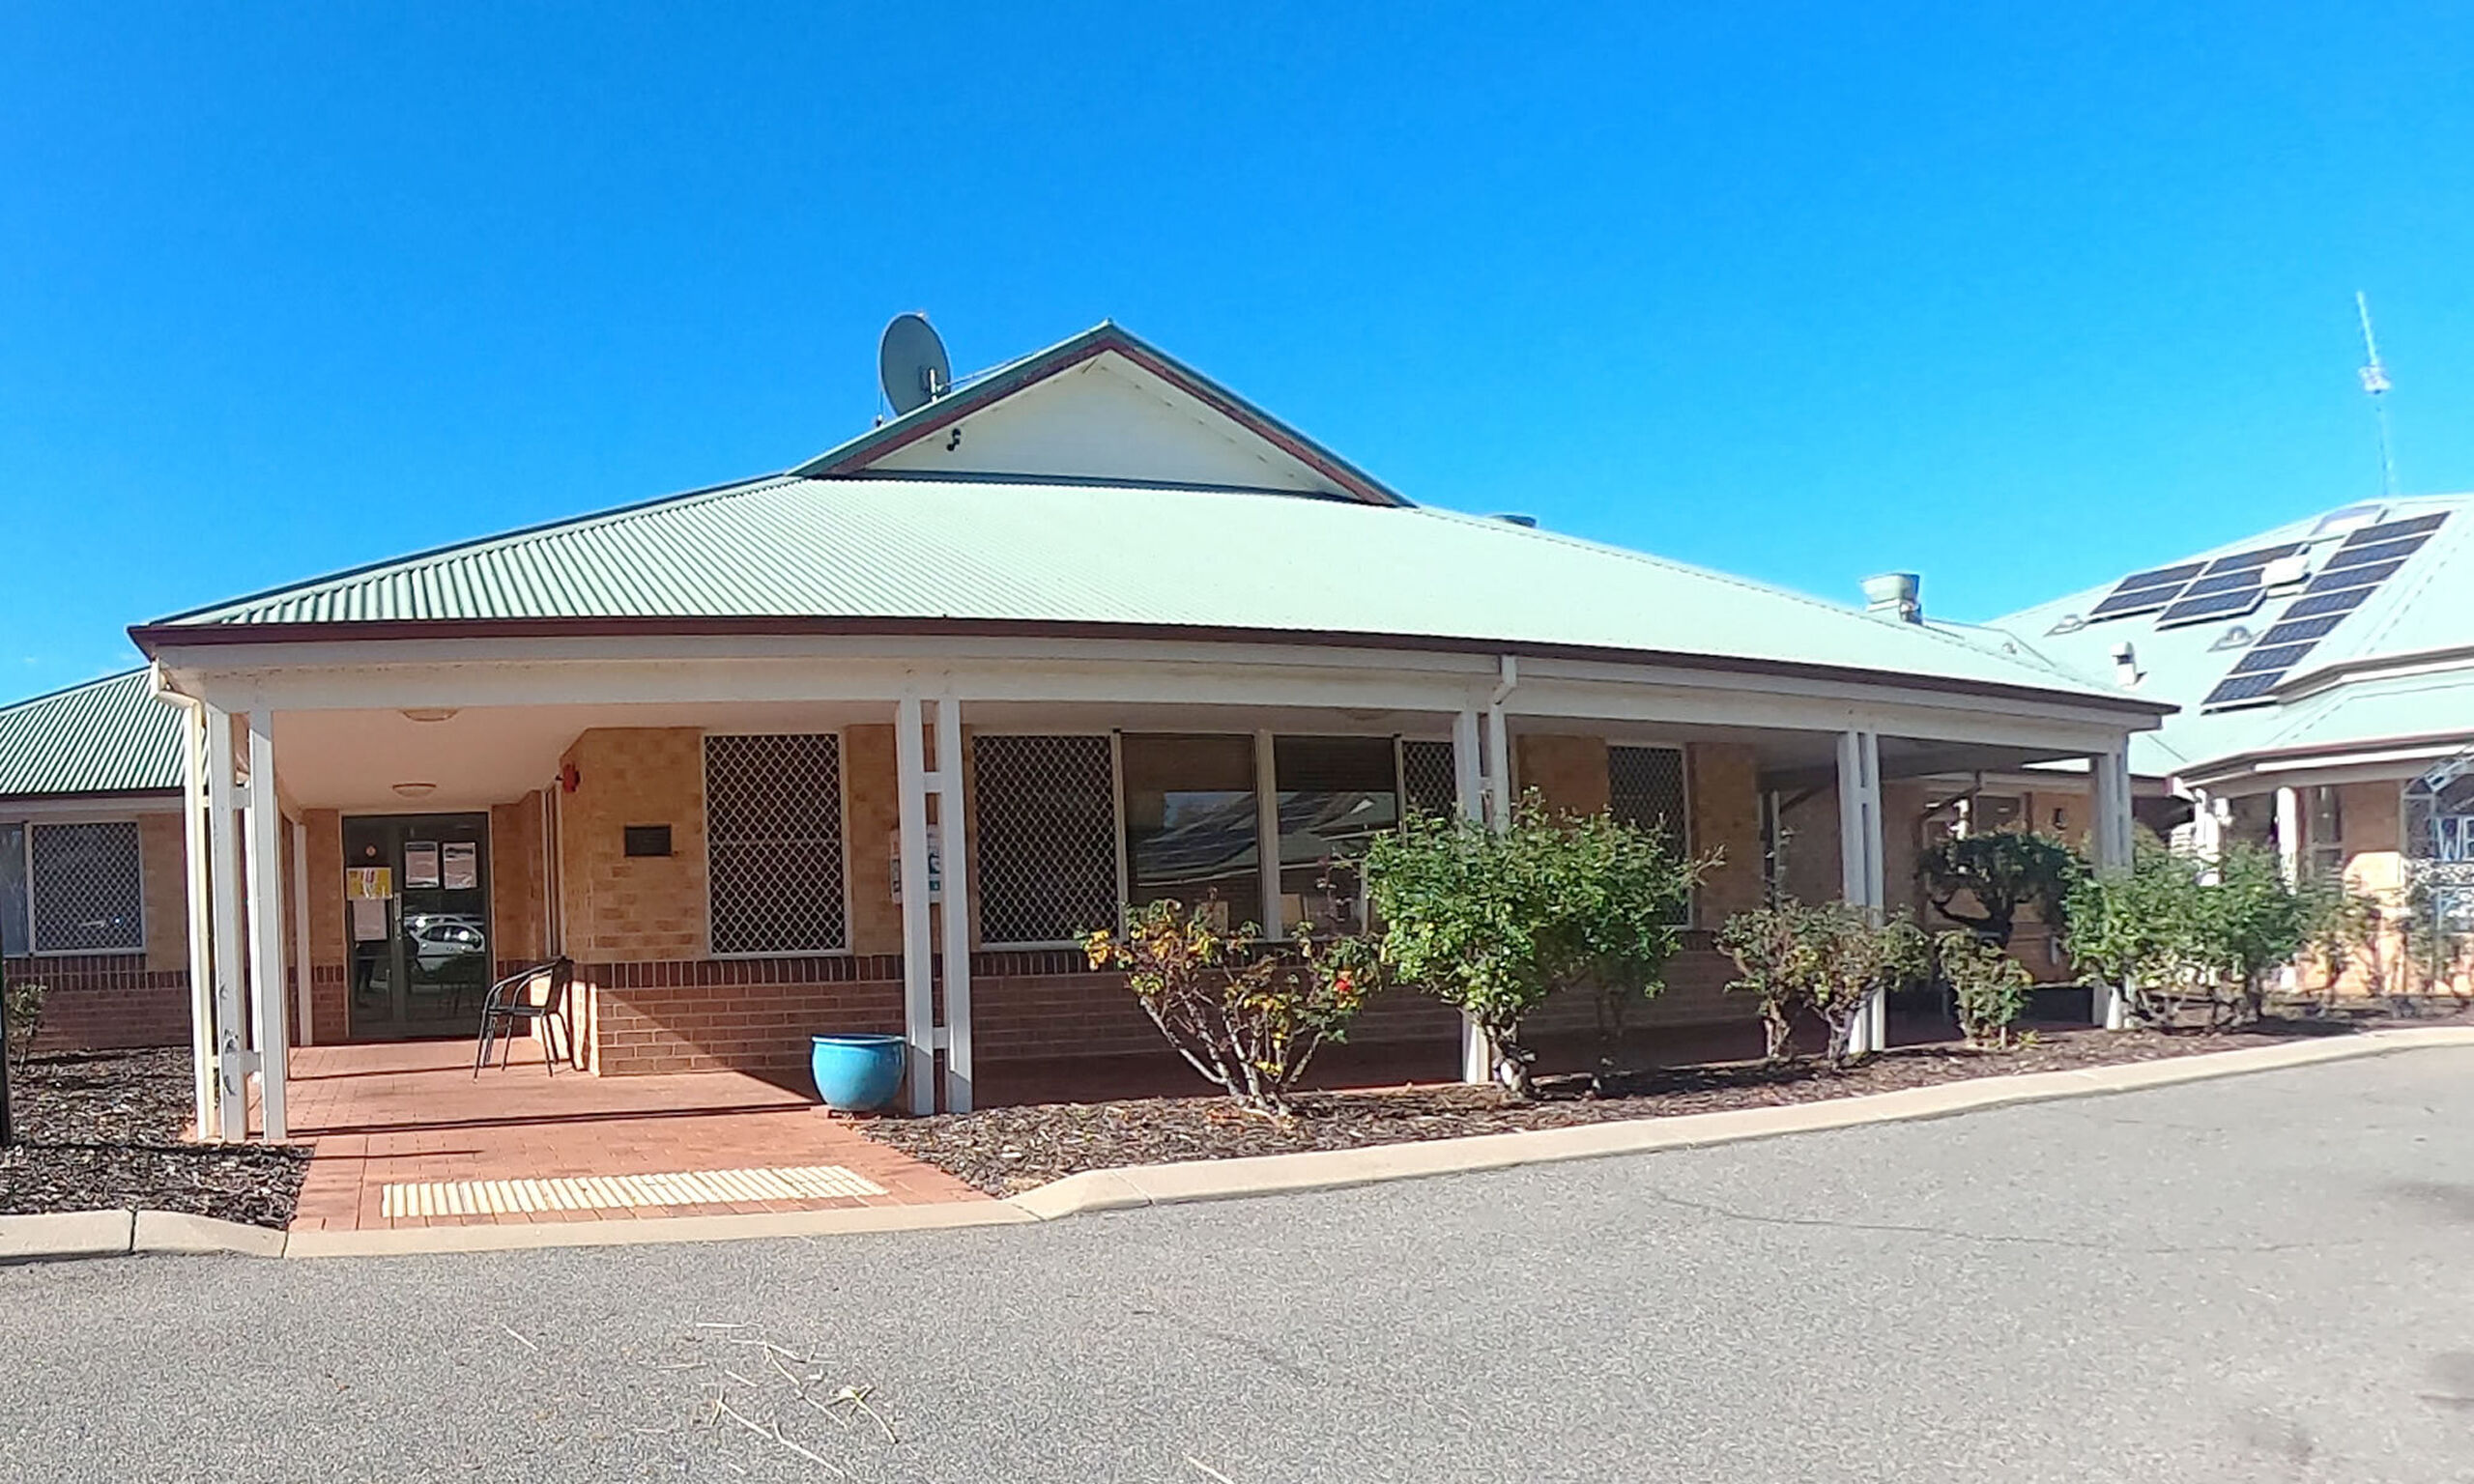 main entry for nursing home residents at baptistcare kalkarni aged care home in brookton wa